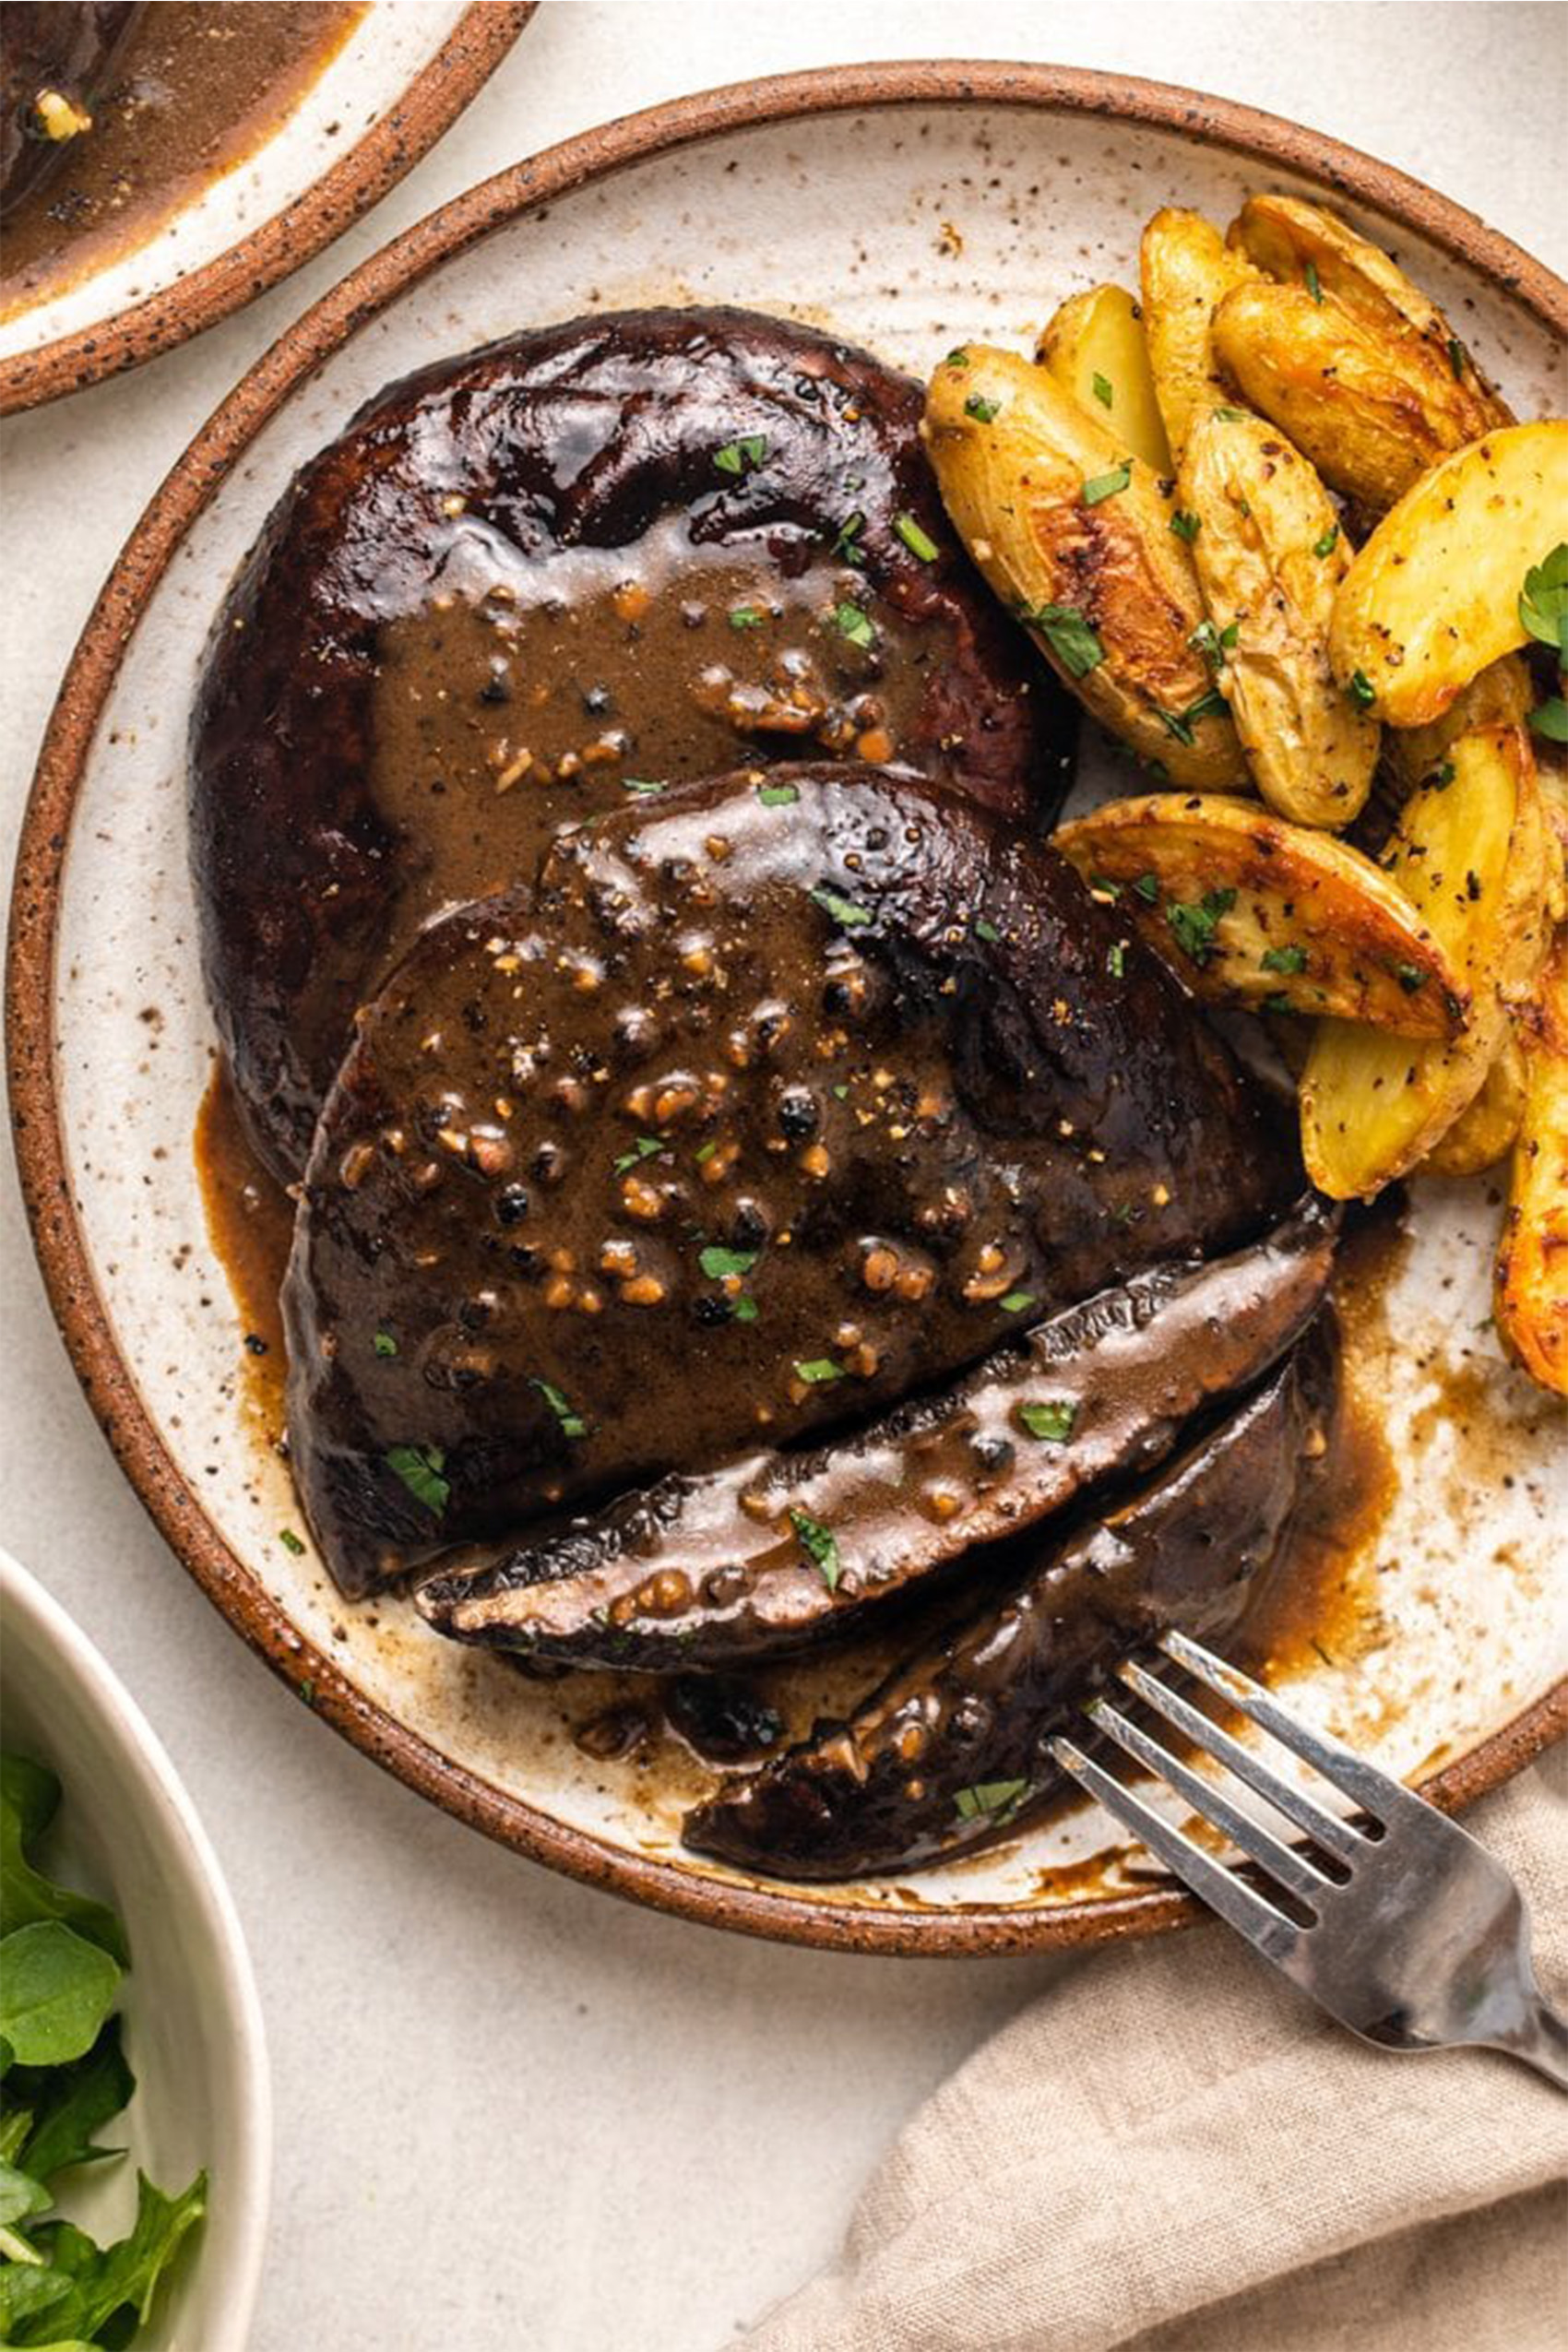 a grilled portobello mushroom served with potatoes and a peppercorn sauce